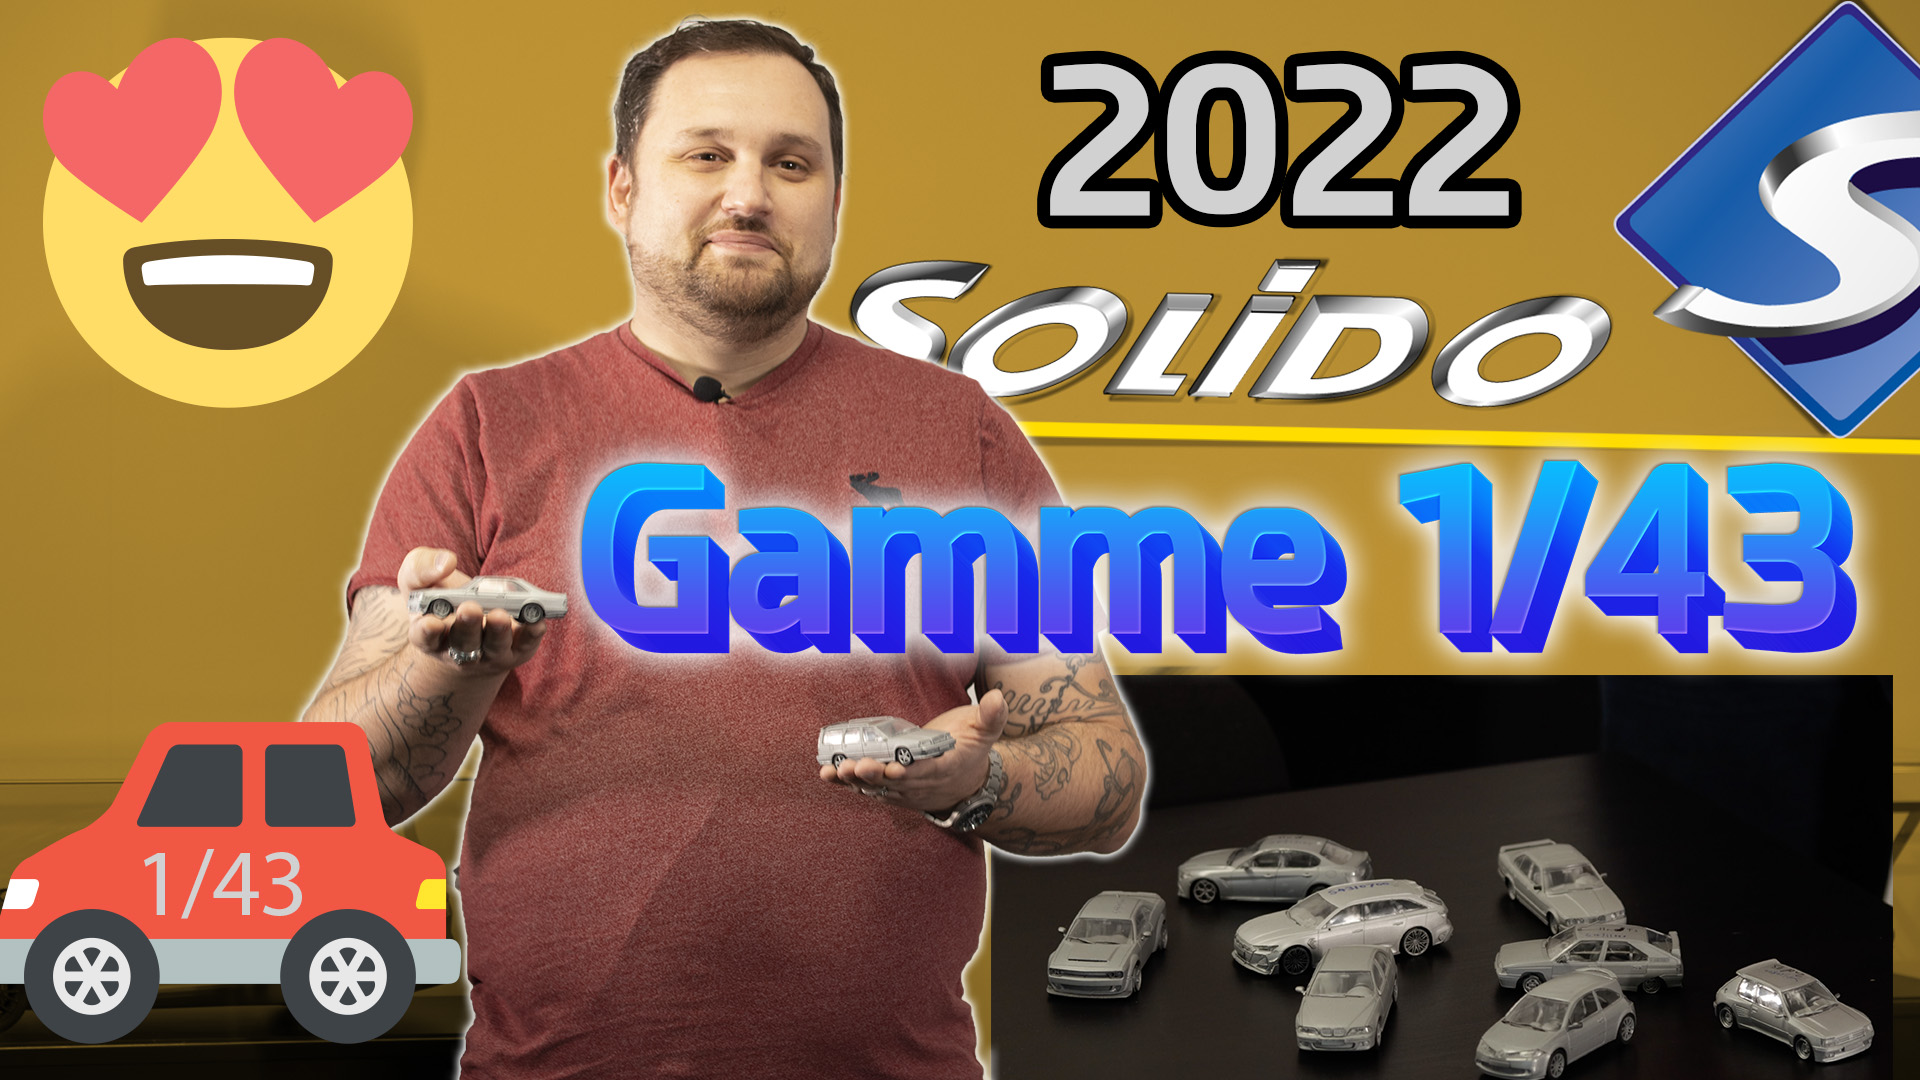 The 1/43 scale will be back at Solido in 2022 ! - Solido